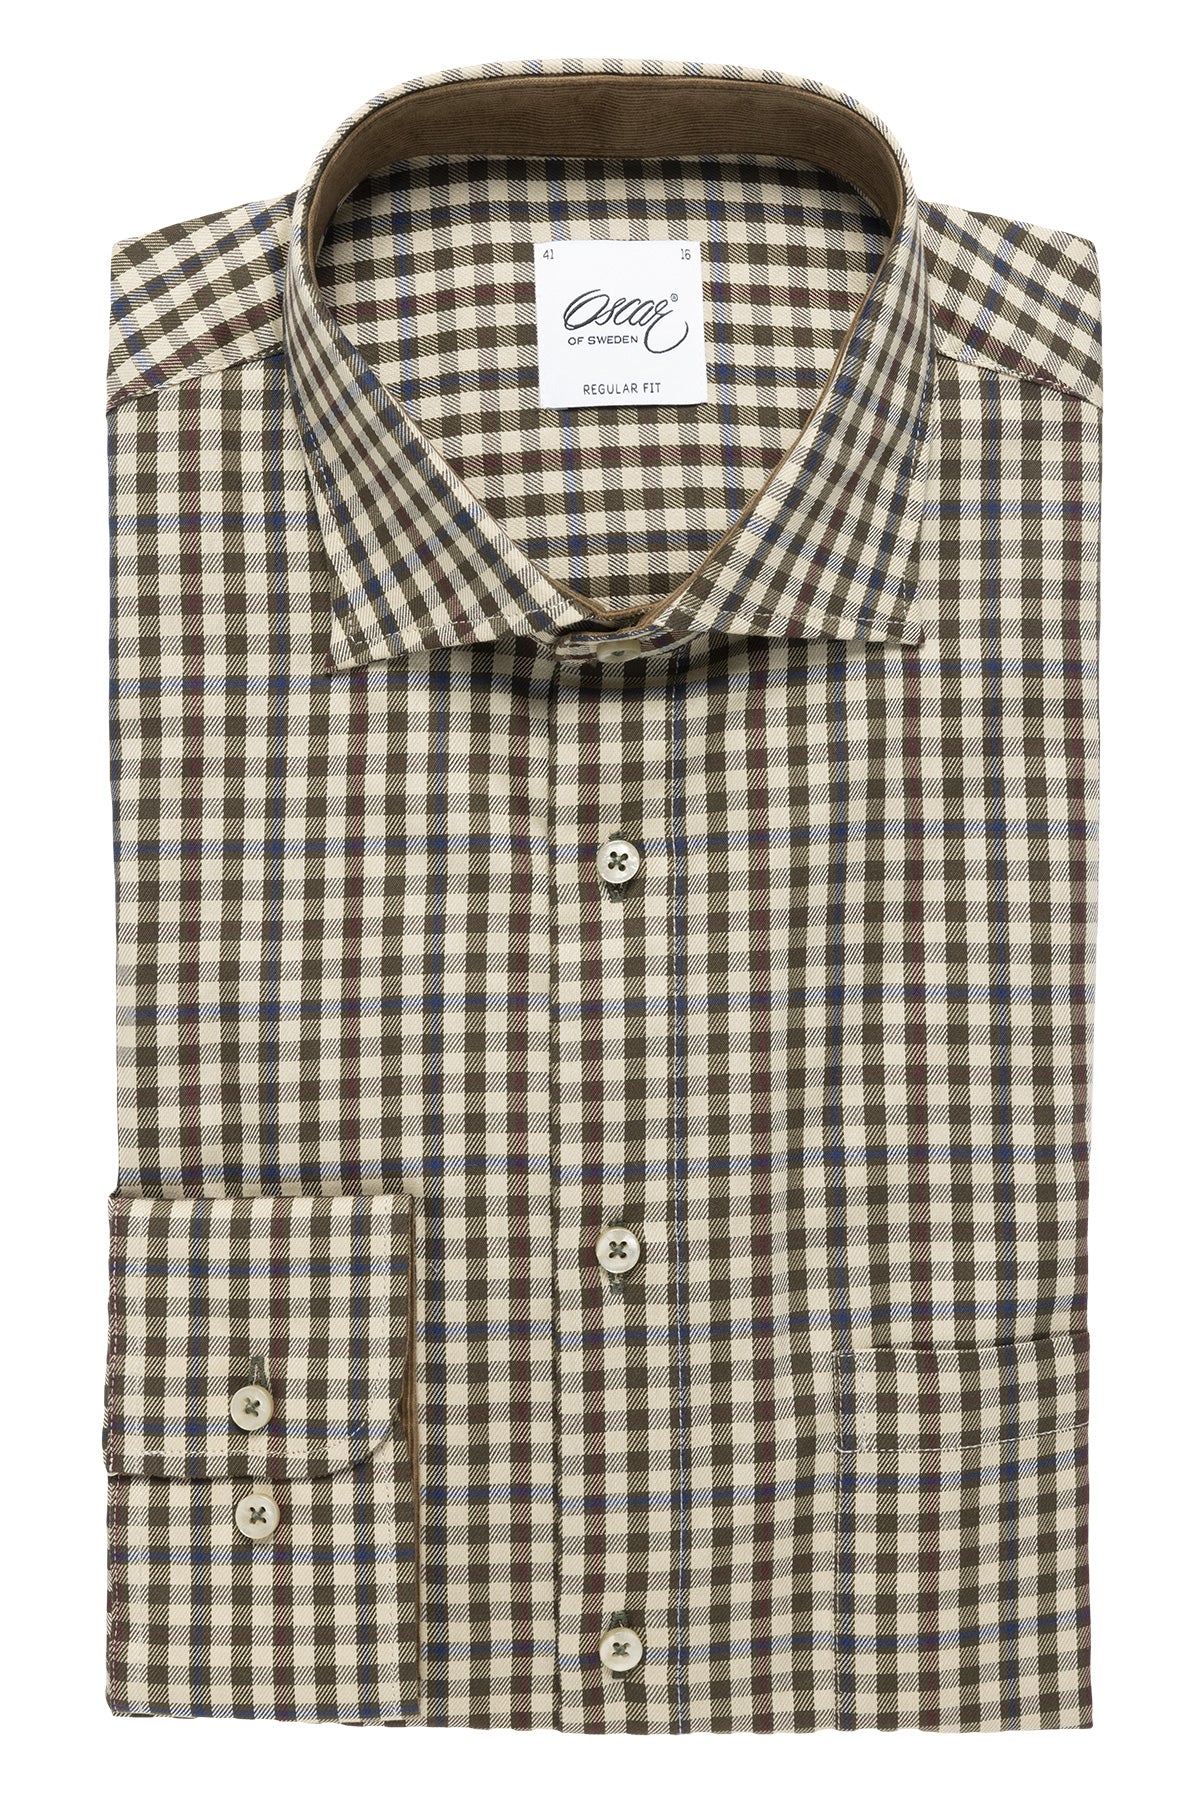 Brown checked regular fit shirt with contrast details